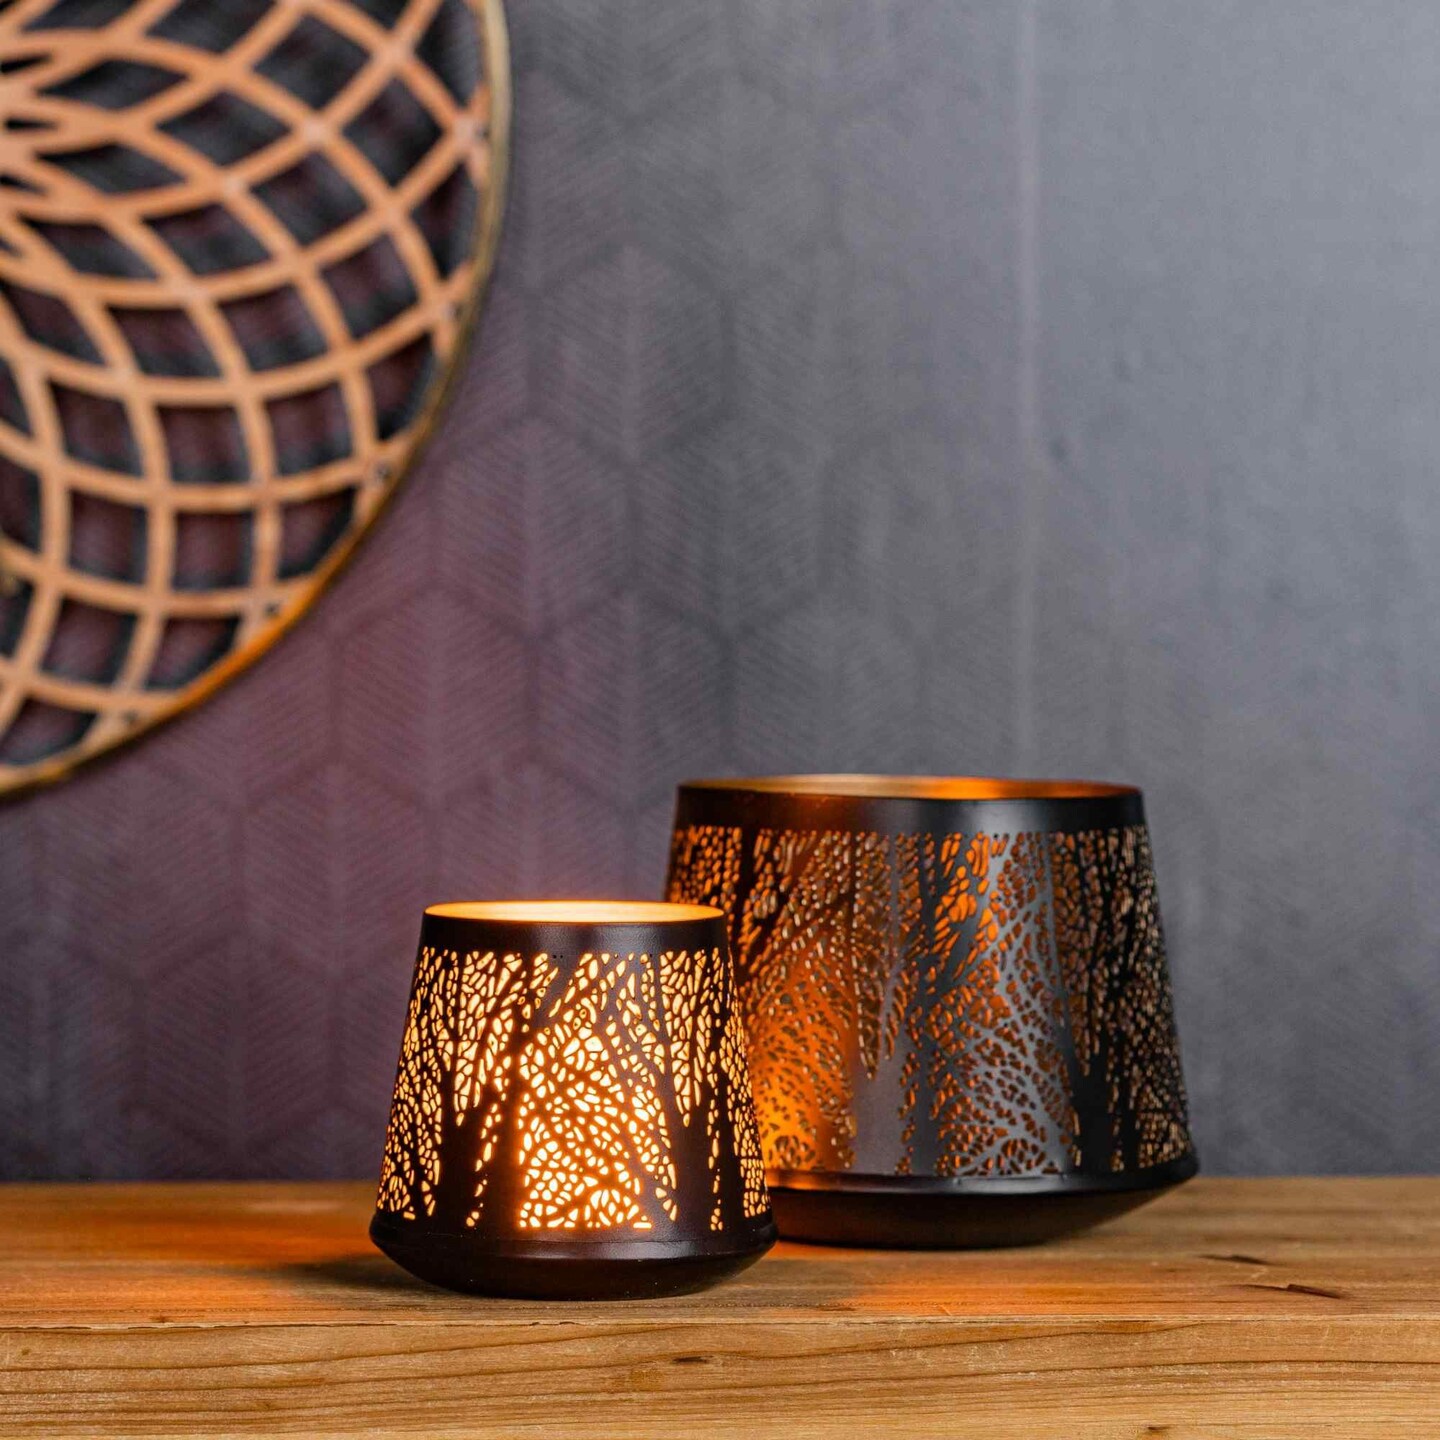 elevate your home with these abstract cool candles